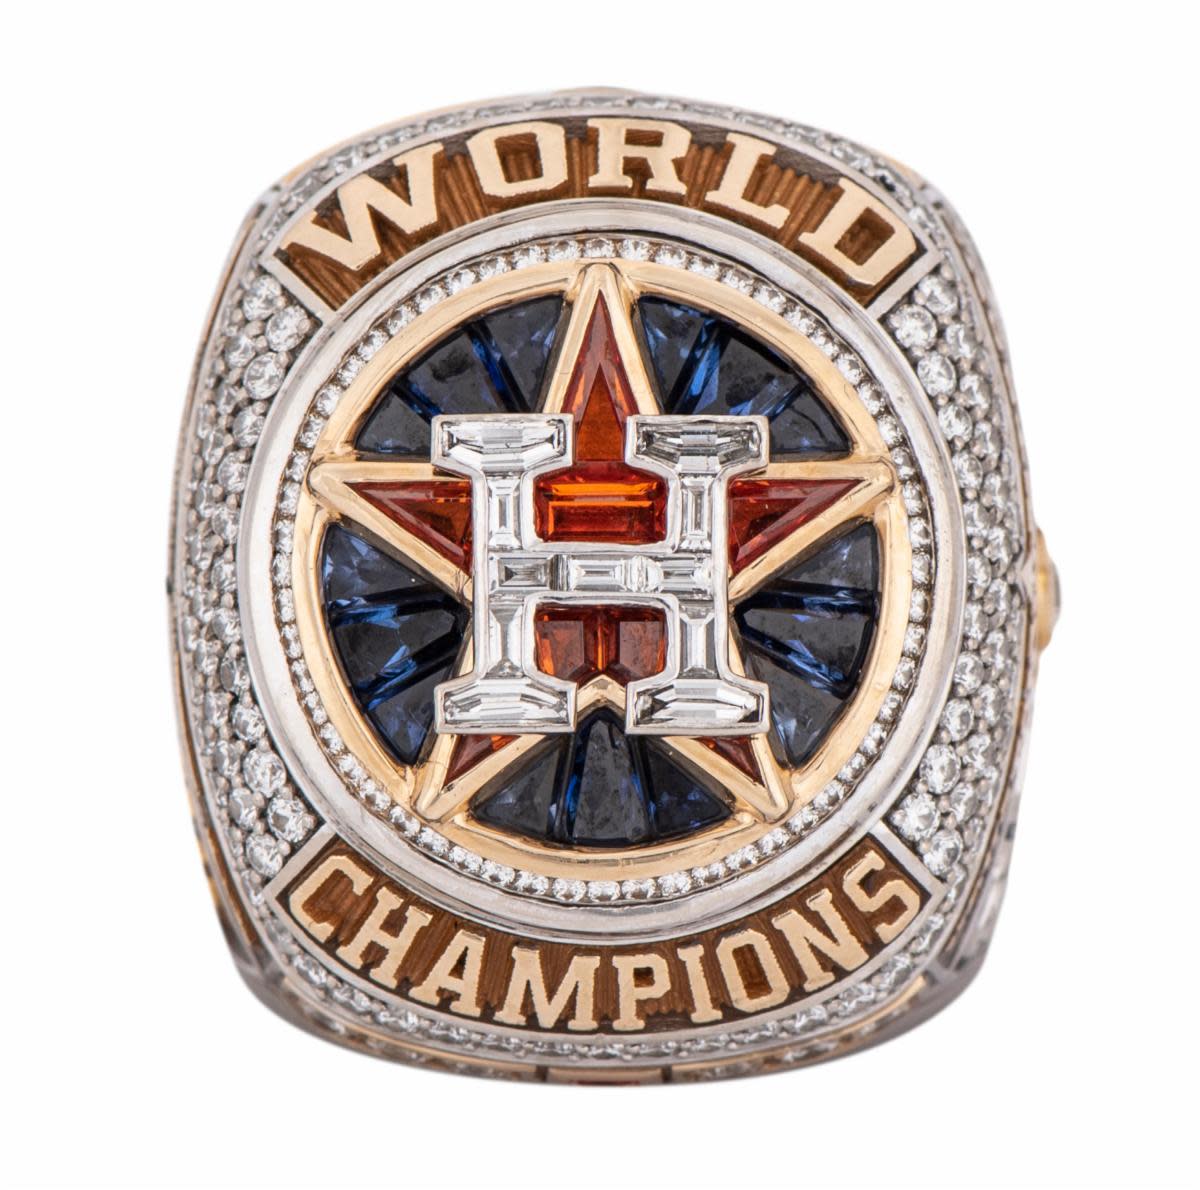 Houston Astros 2017 World Series Rings Details and Symbolism